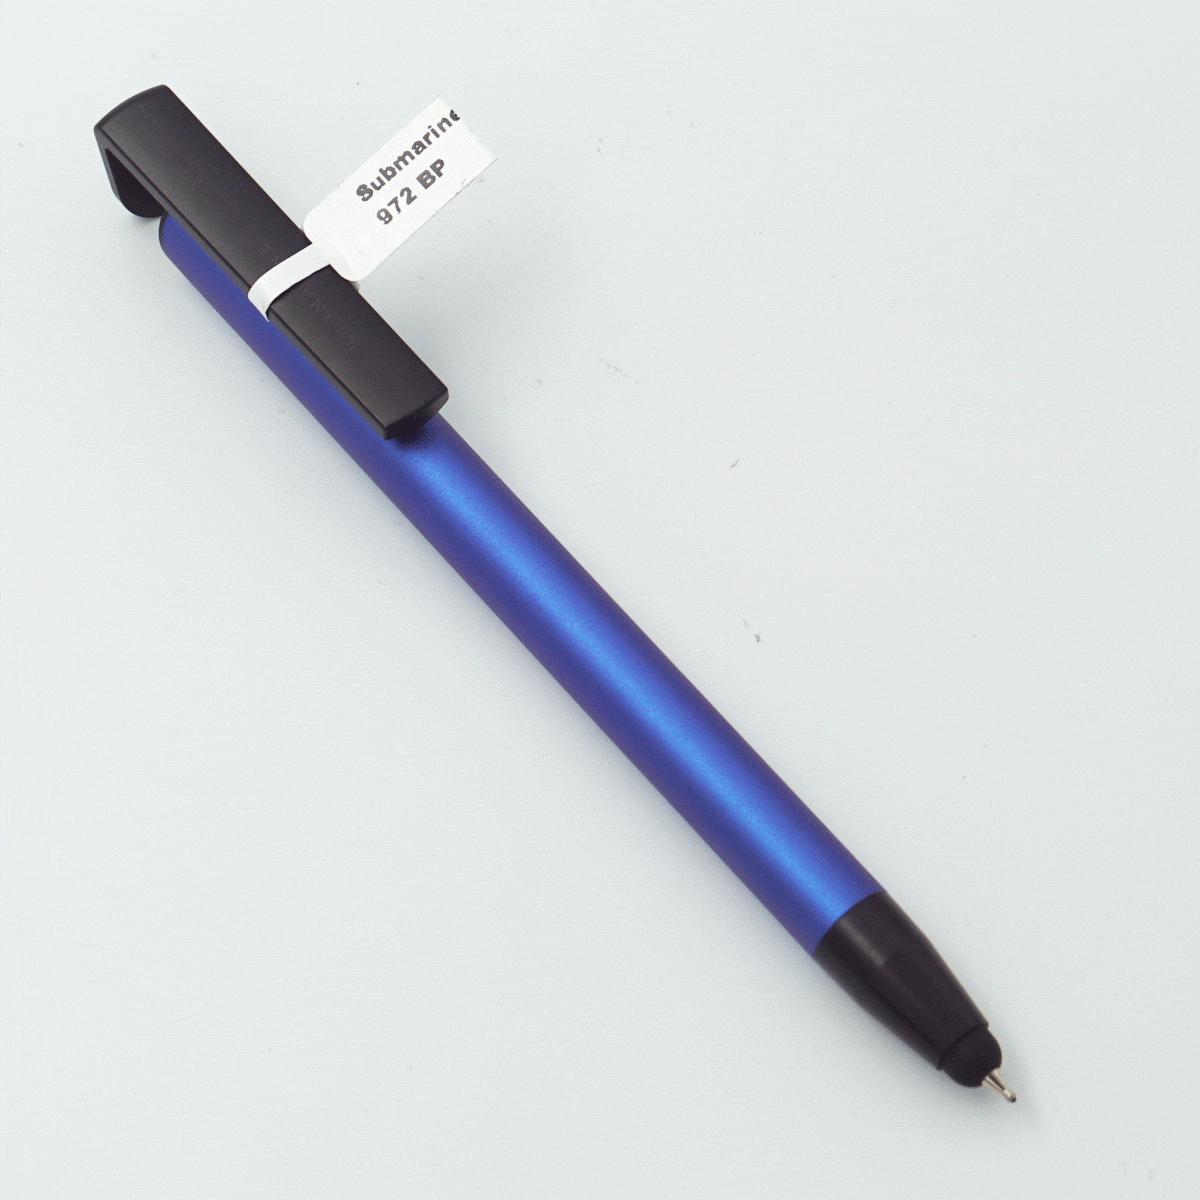 Submarine 972 Blue Color Body With Black Color Clip And Grip On Stylus Fine Tip Retractable Type Ball Pen SKU 23803